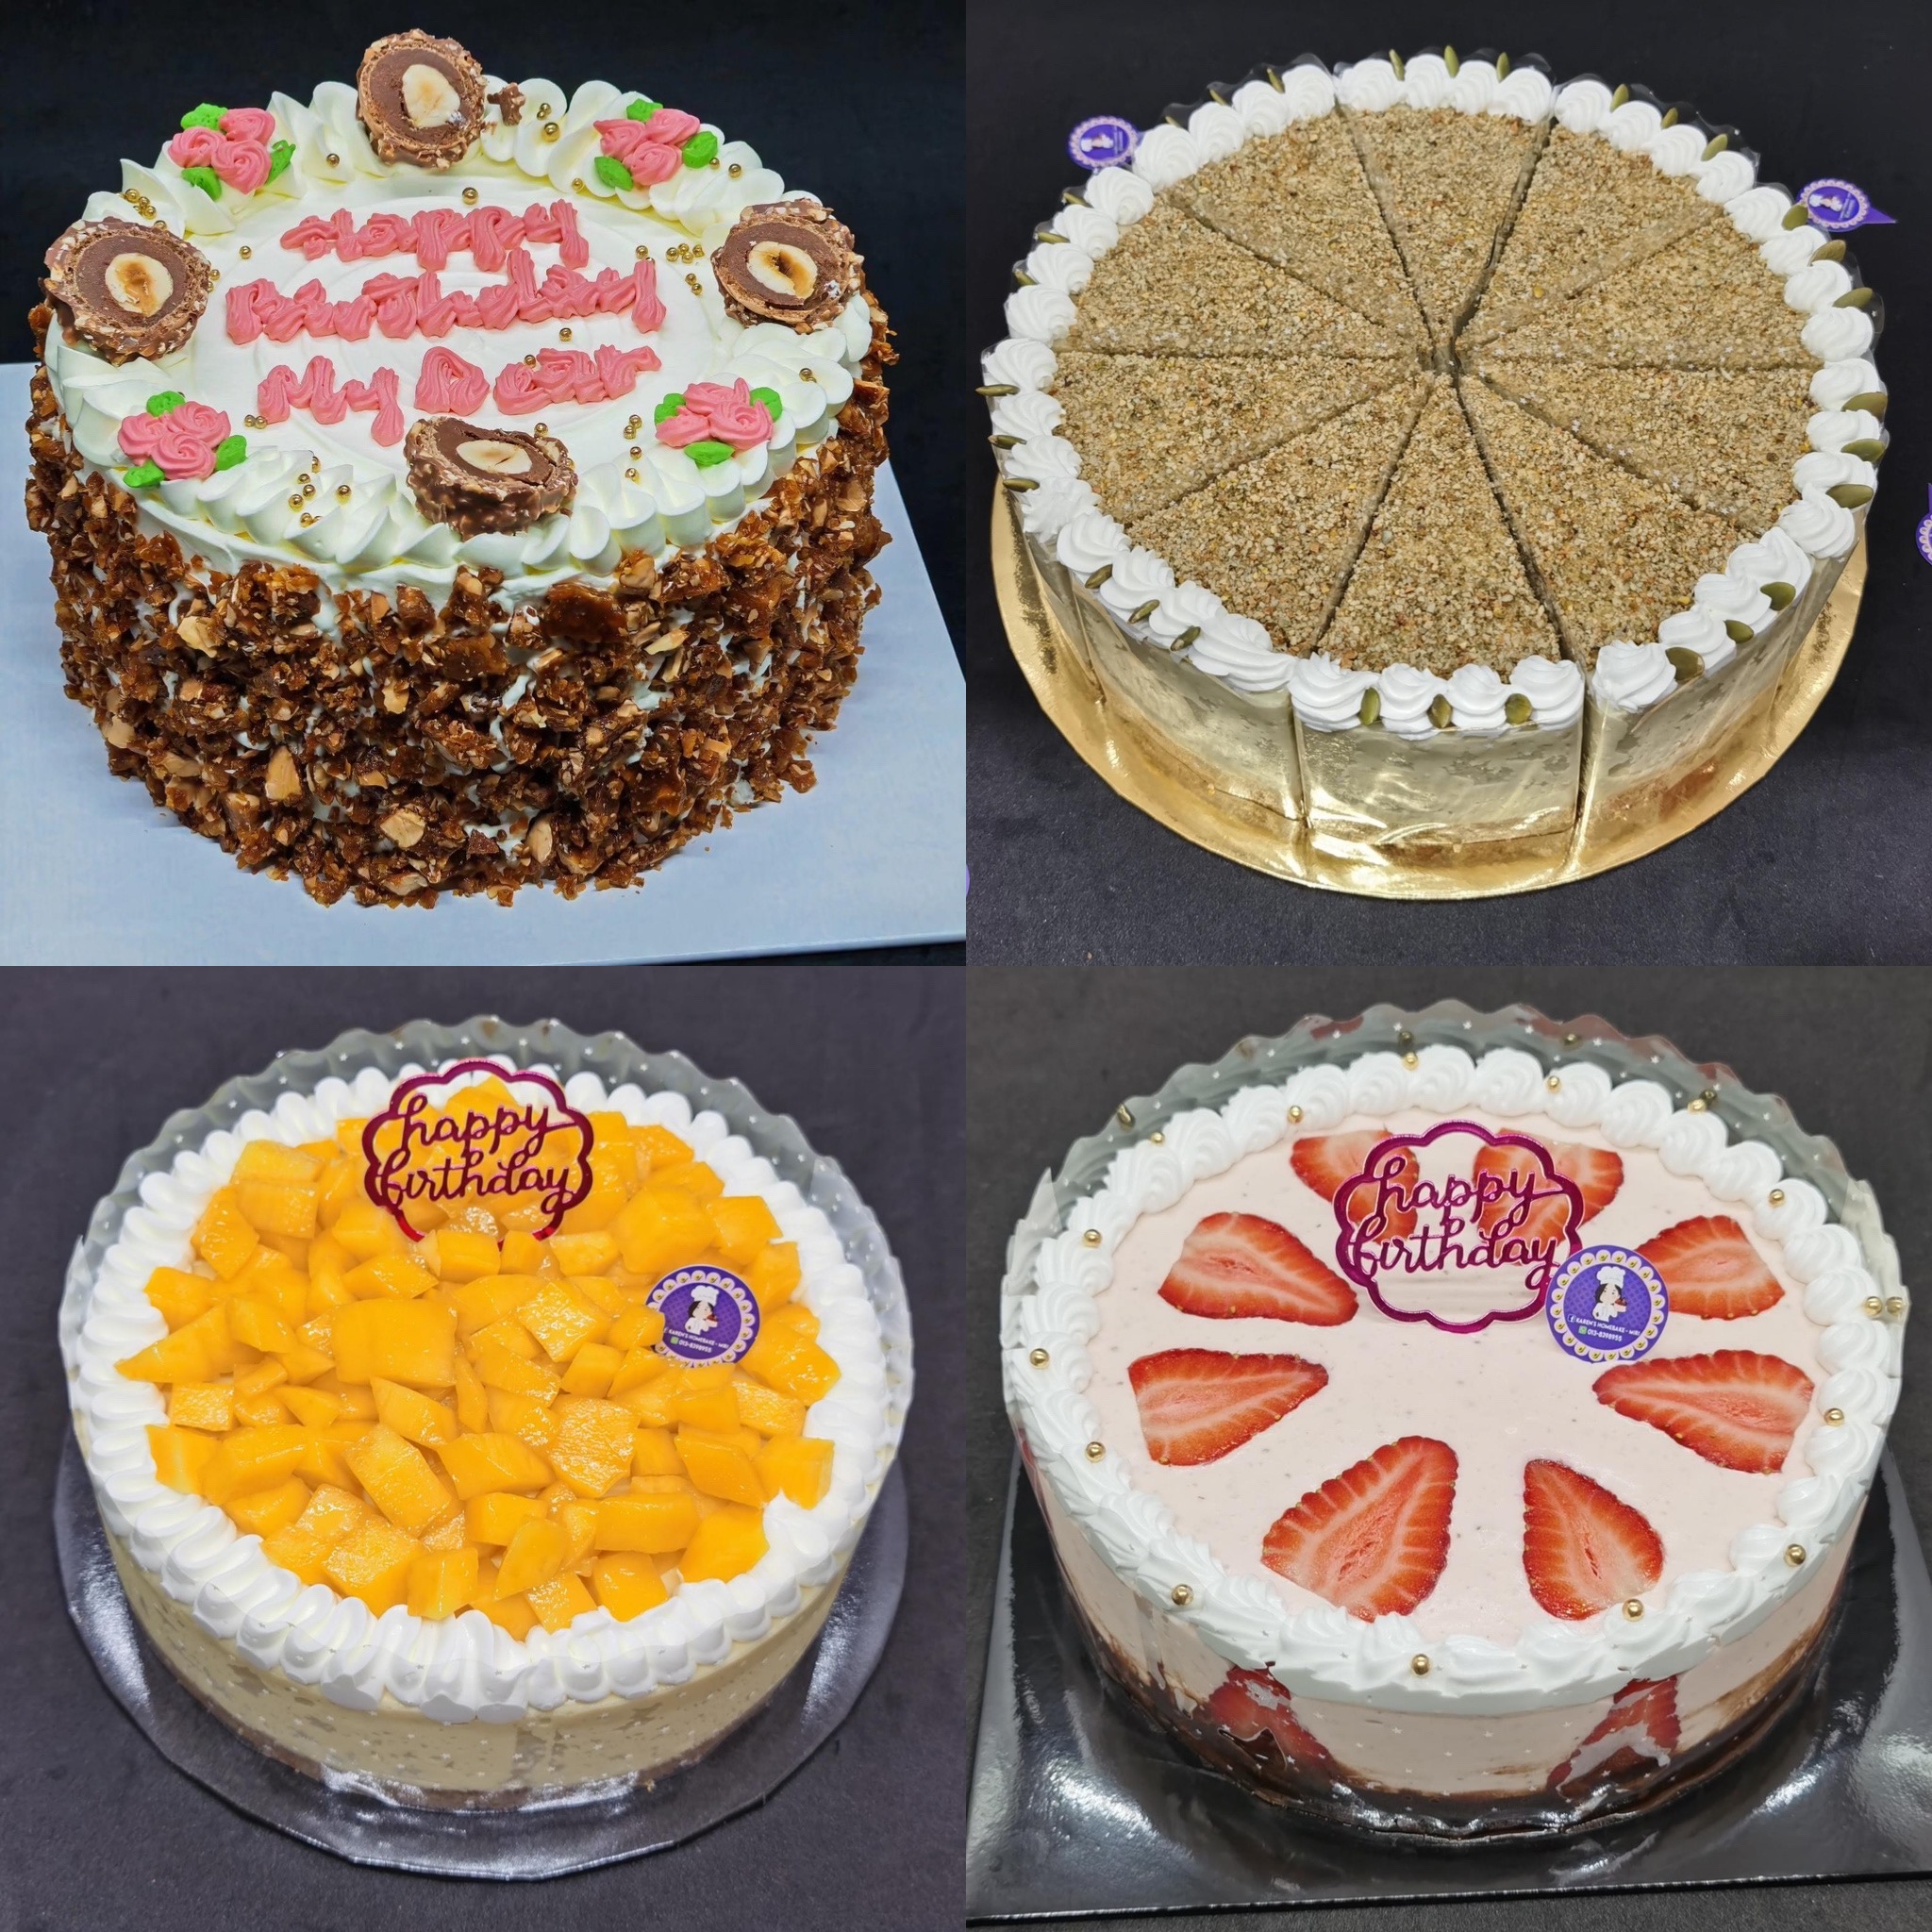 Beautiful Mother’s Day Cakes in Miri City - Miri City Sharing